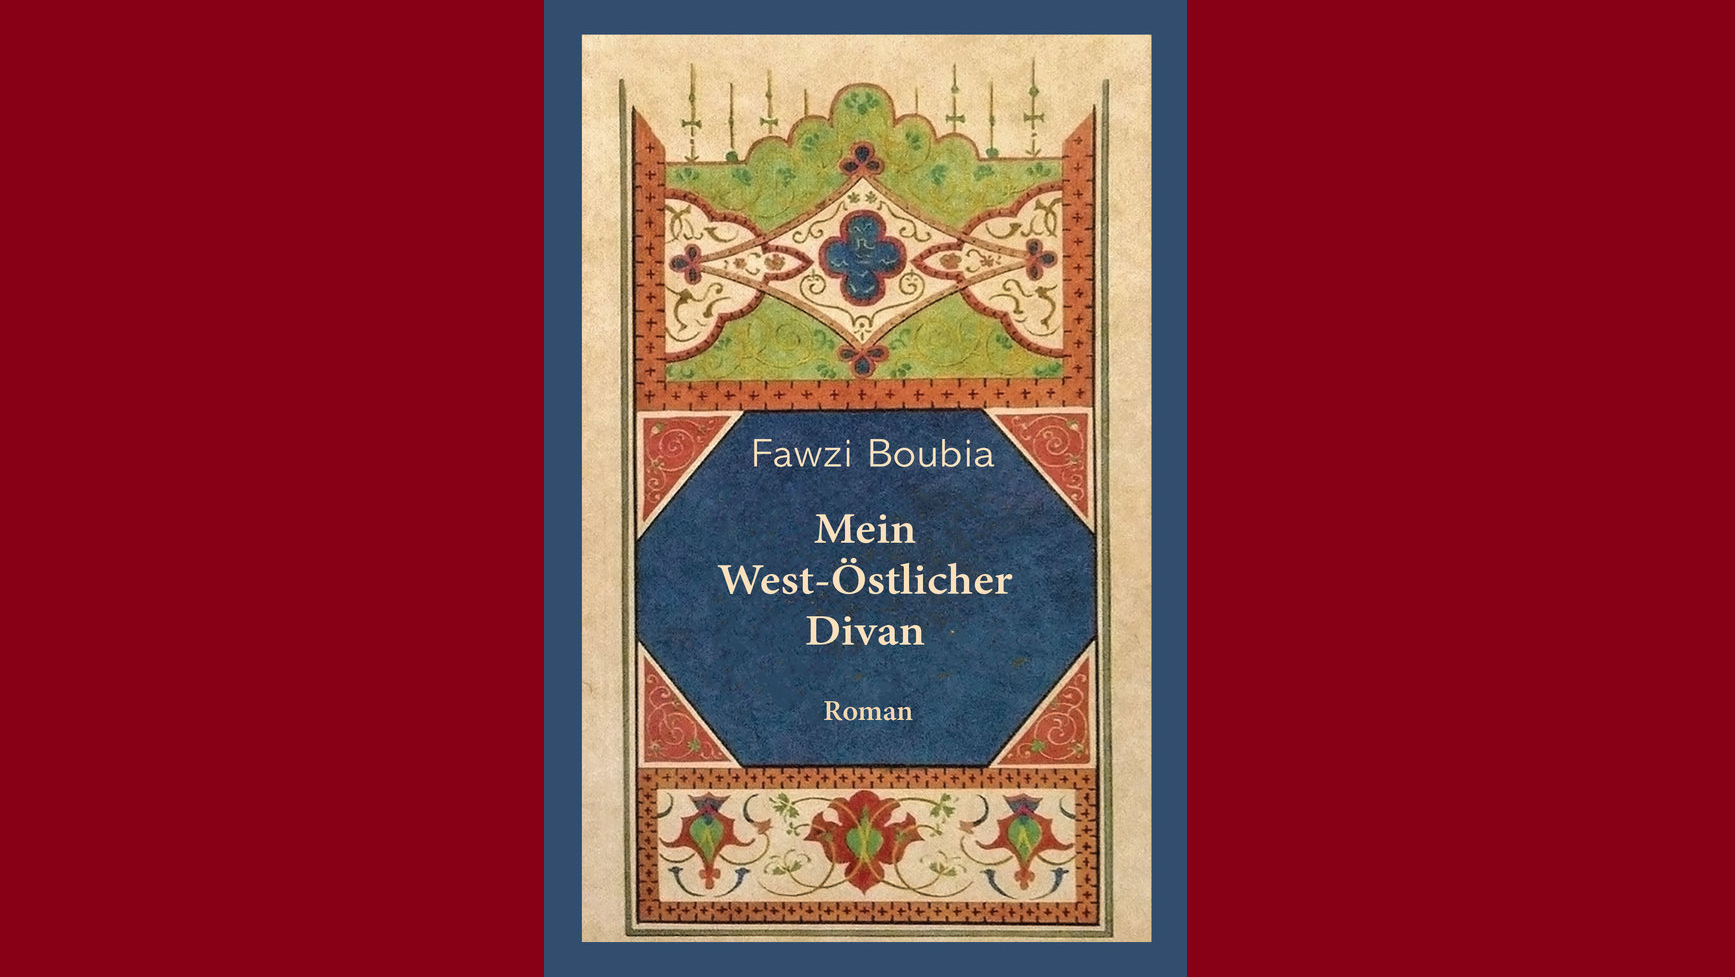 Fawzi Boubia's strongly autobiographical recent novel "Mein West-Oestlicher Diwan" takes a merciless look at political and cultural trends in Germany, while celebrating the country's cultural and intellectual past – in particular Goethe's open-mindedness.